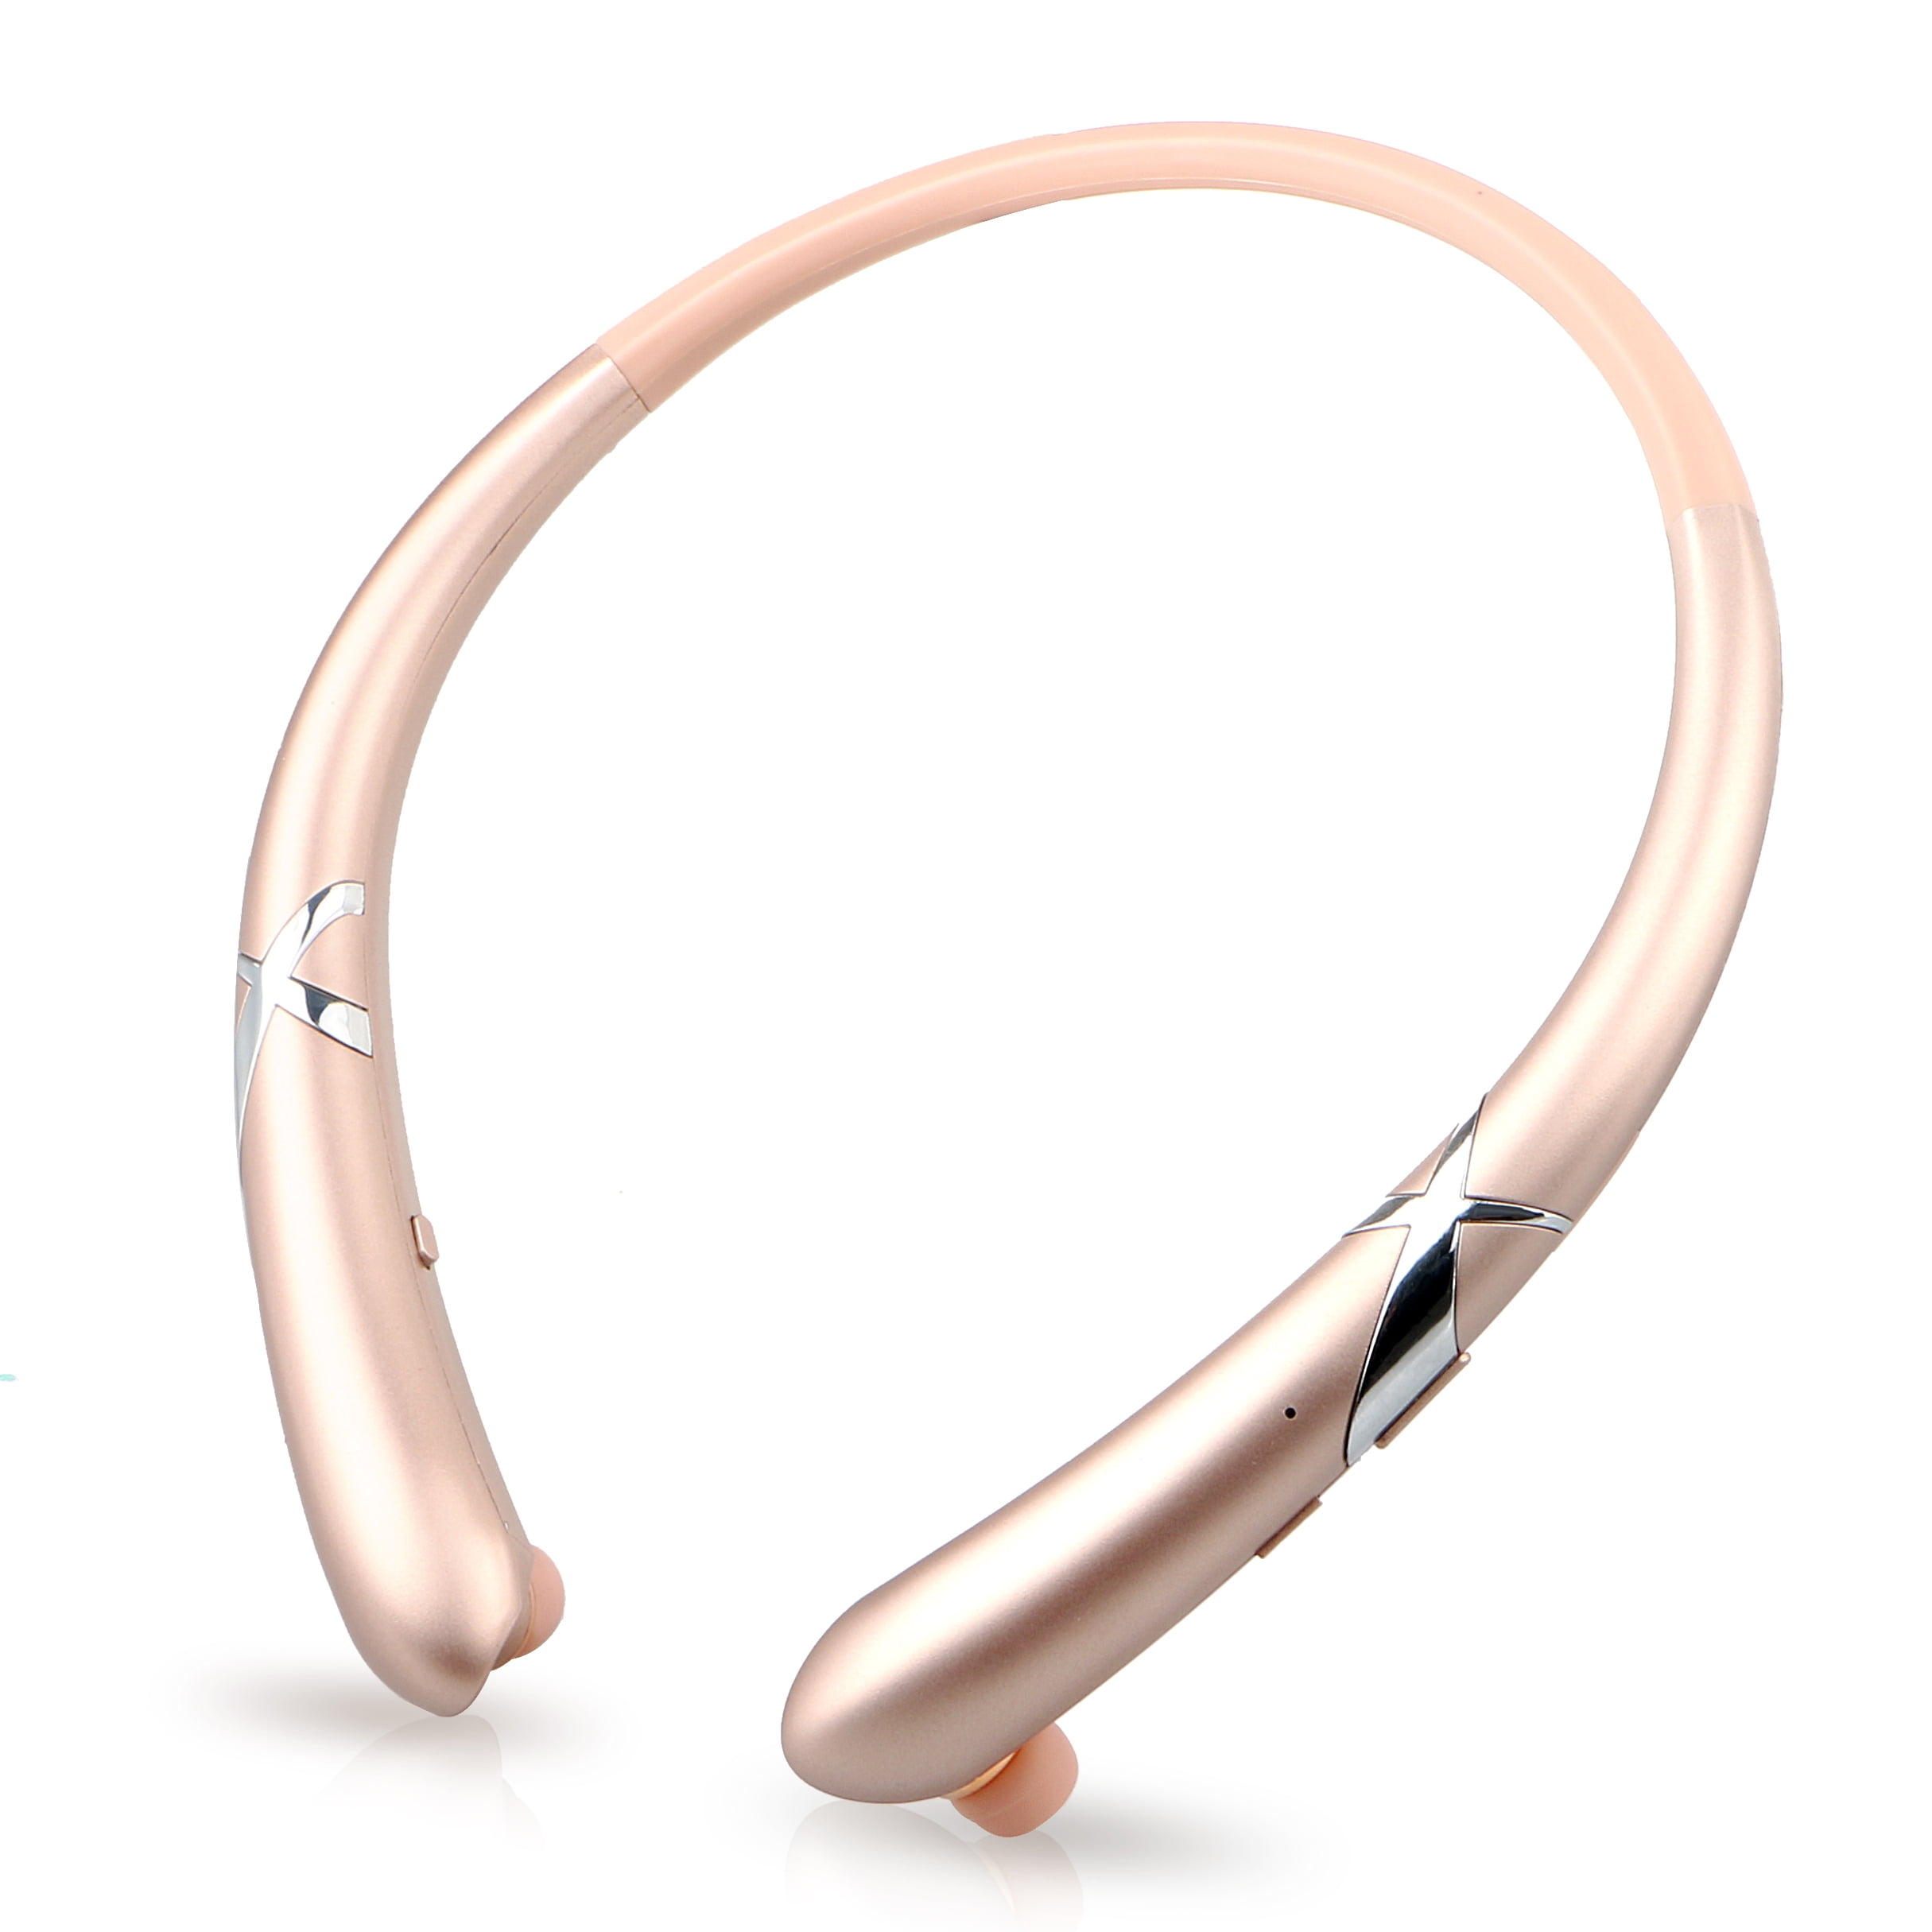 Wireless Bluetooth 5.0 NeckBand Headset Sport Stereo Retractable Headphone Earbuds Earphone with MIC Microphone(Rose Gold)